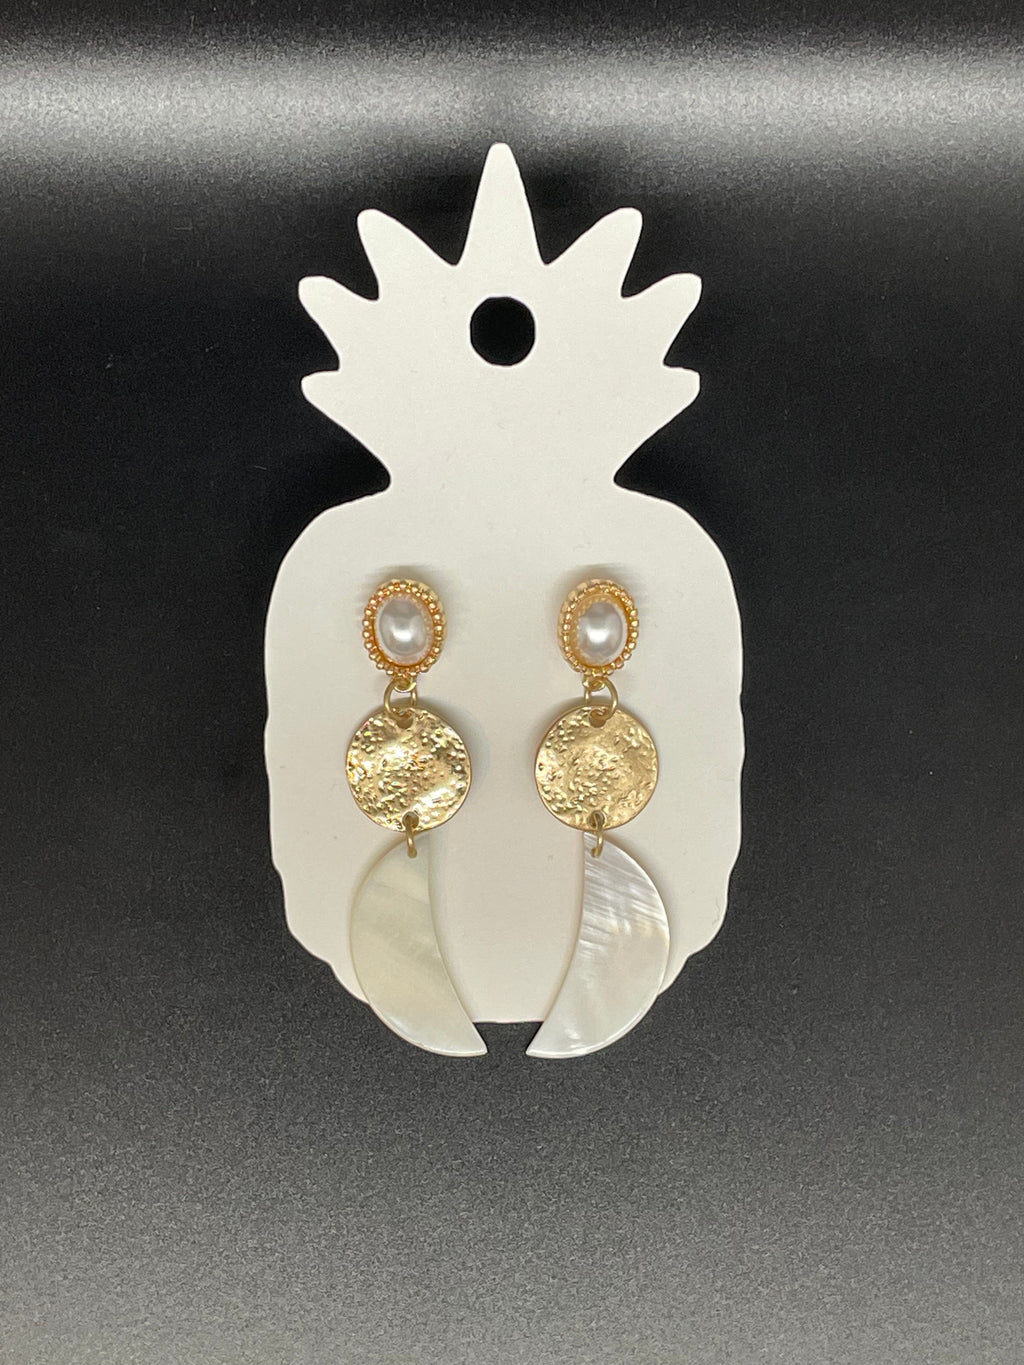 Gold & Mother of Pearl Crescent Moon Dangle Earrings